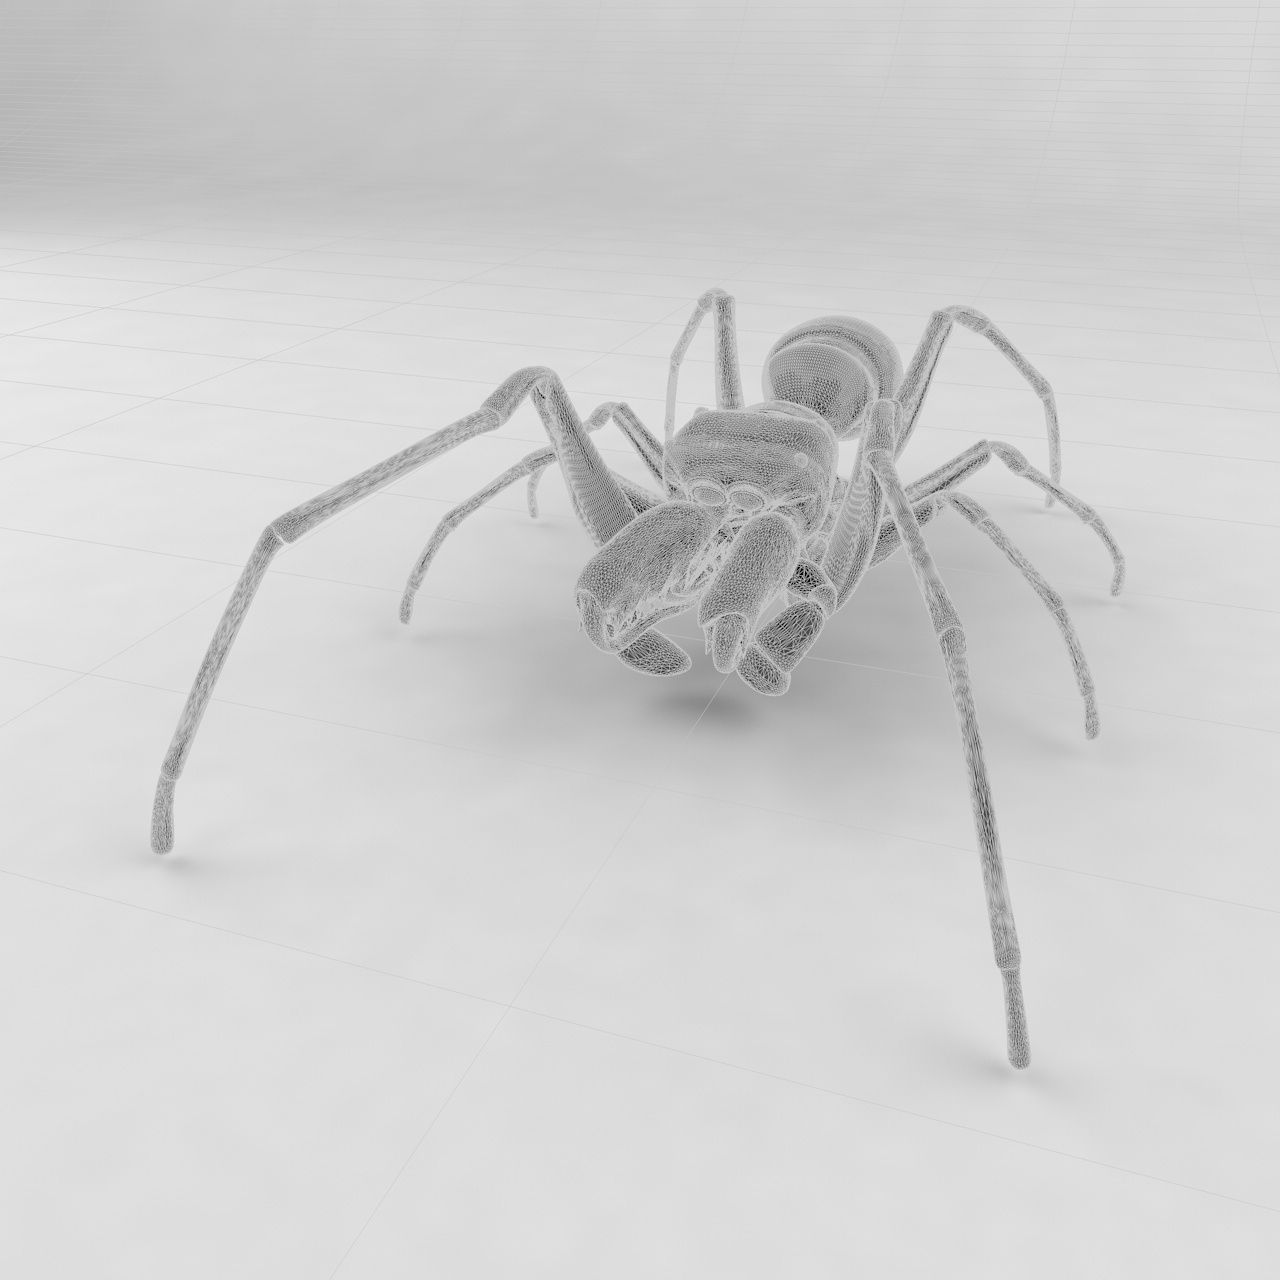 Antmimicking spider insect 3d model